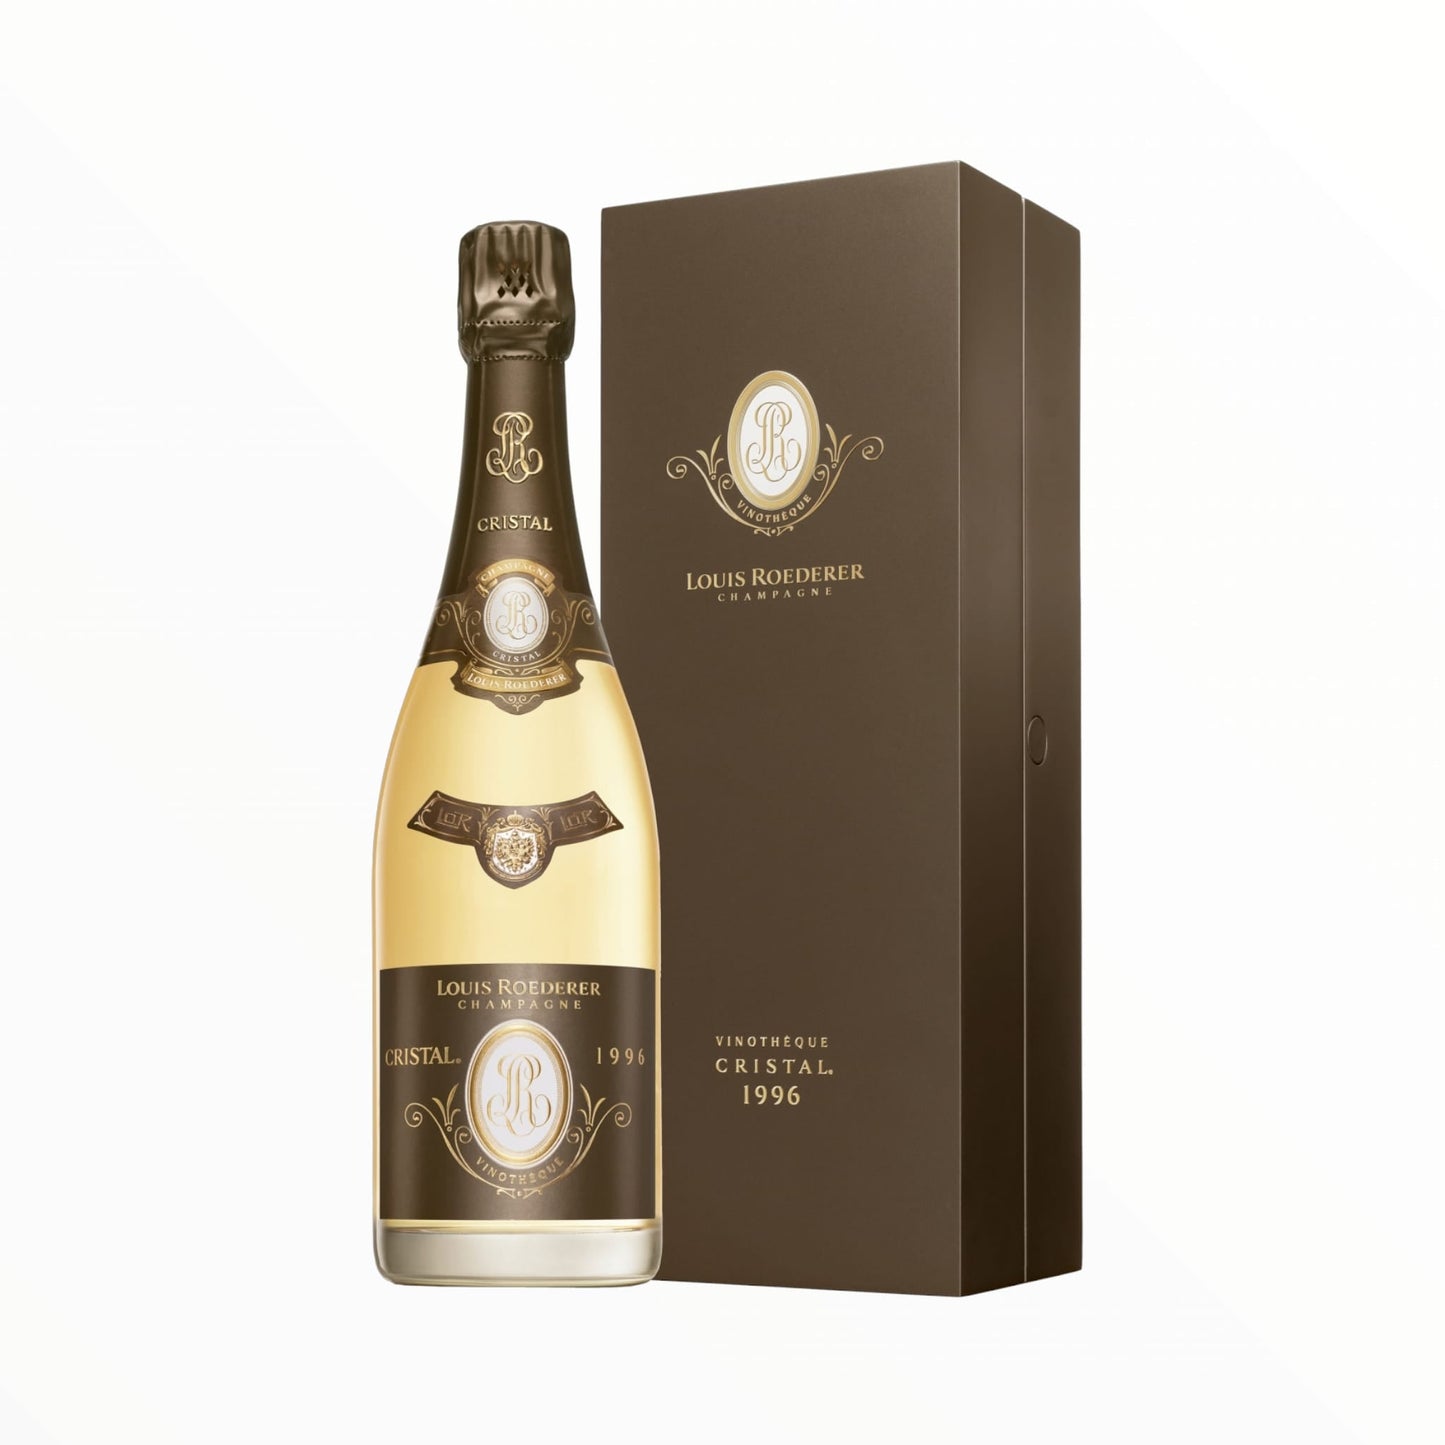 1999 Louis Roederer, Cristal Vinotheque gift box 750ml